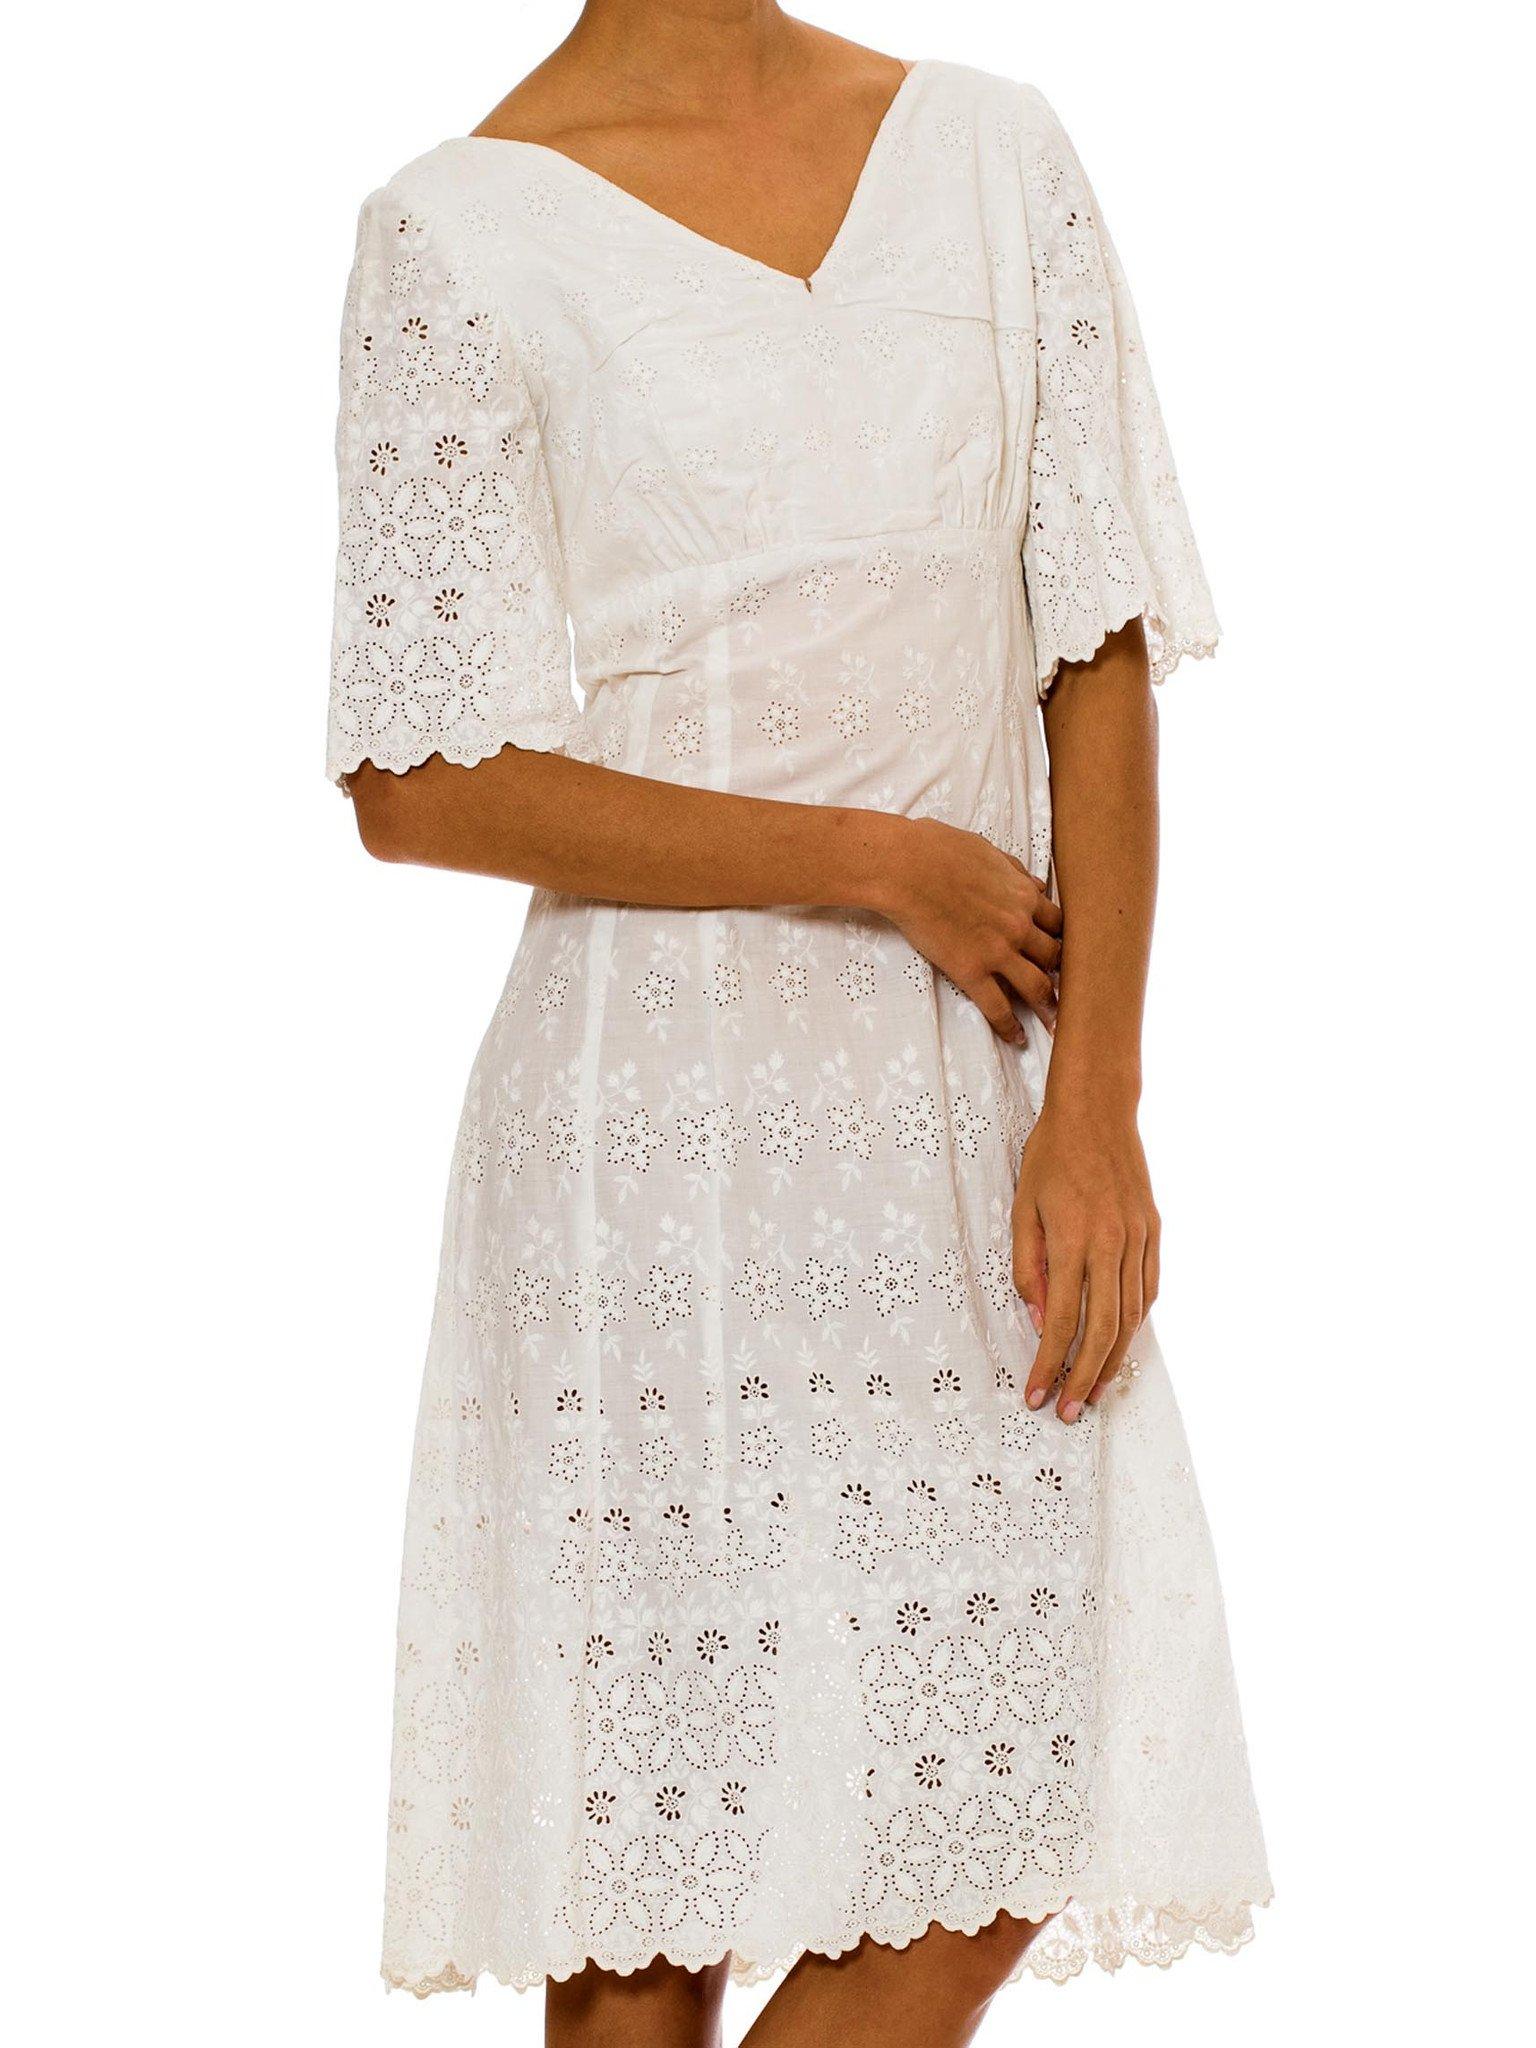 Victorian White Organic Cotton Dress With Floral Eyelet Embroidery & Scalloped  For Sale 5